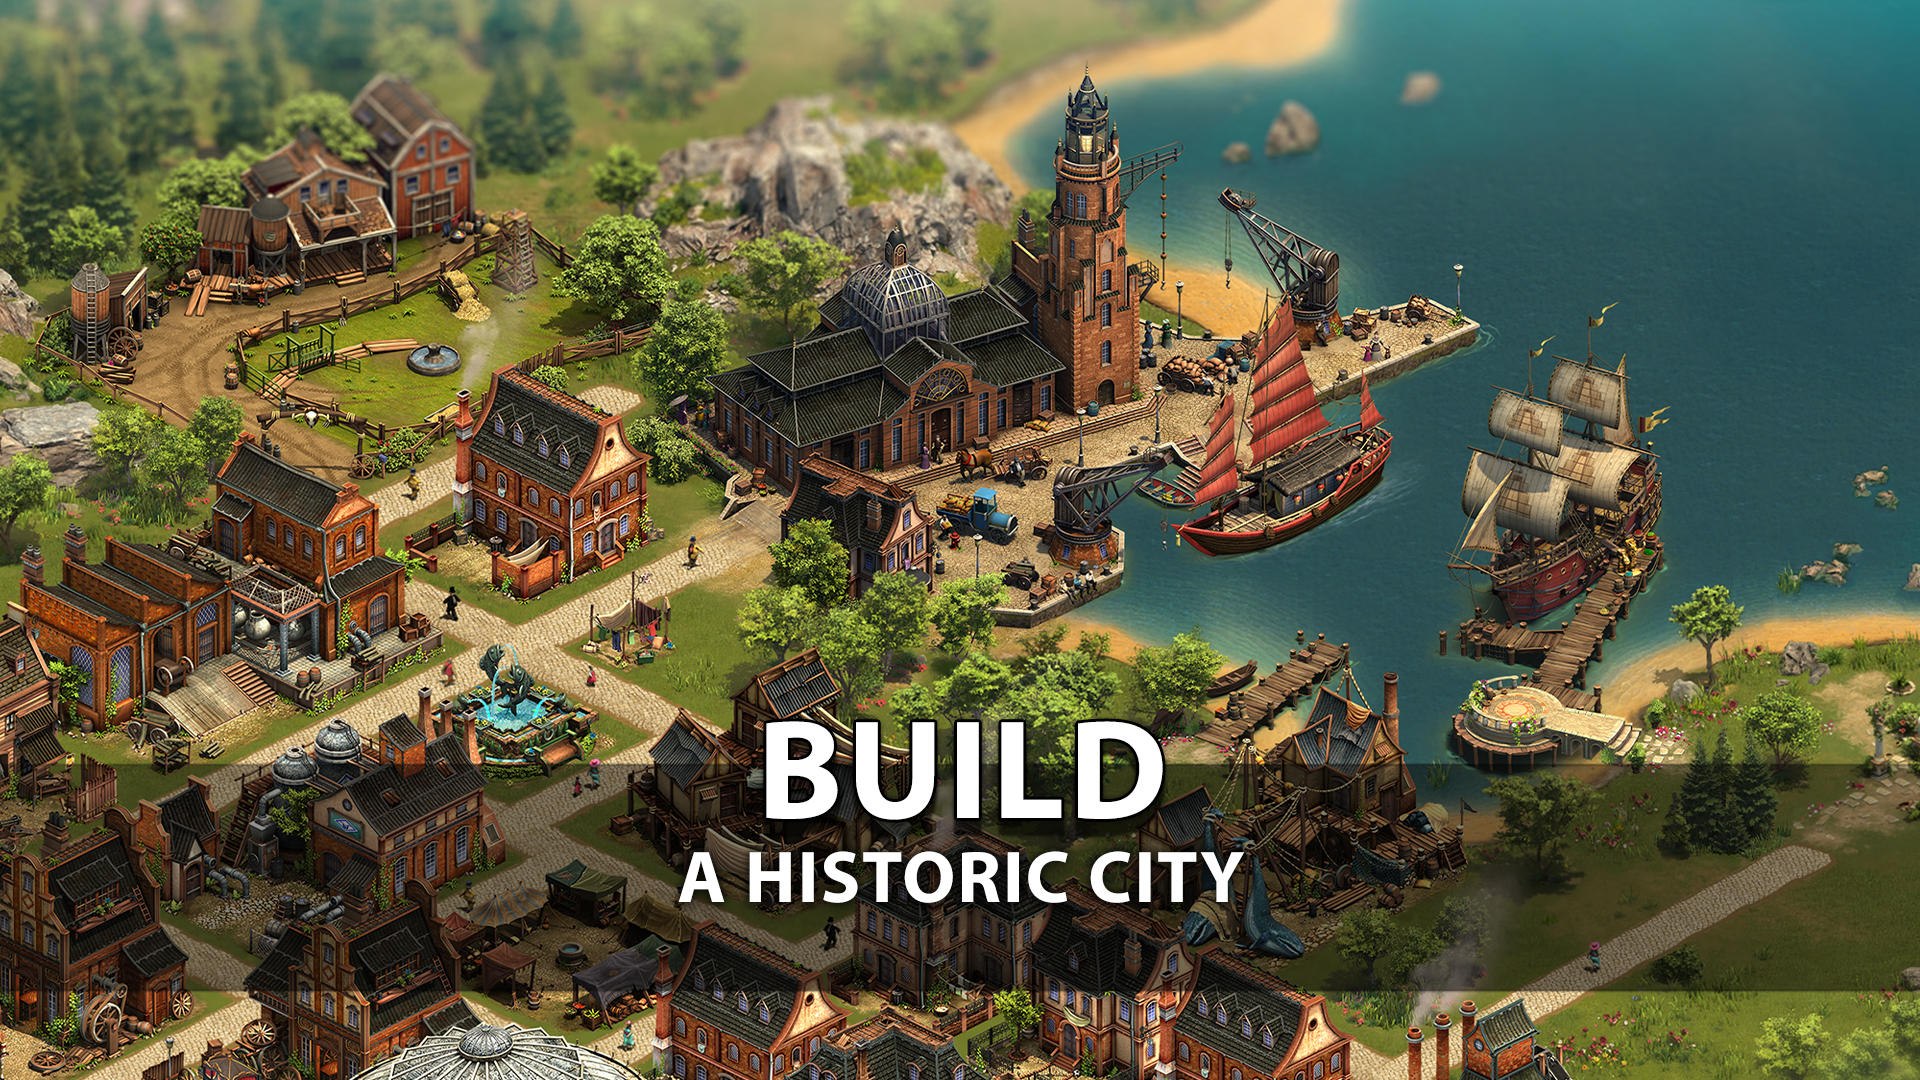 Screenshot 1 of Forge of Empires: Xây dựng thành phố 1.282.20